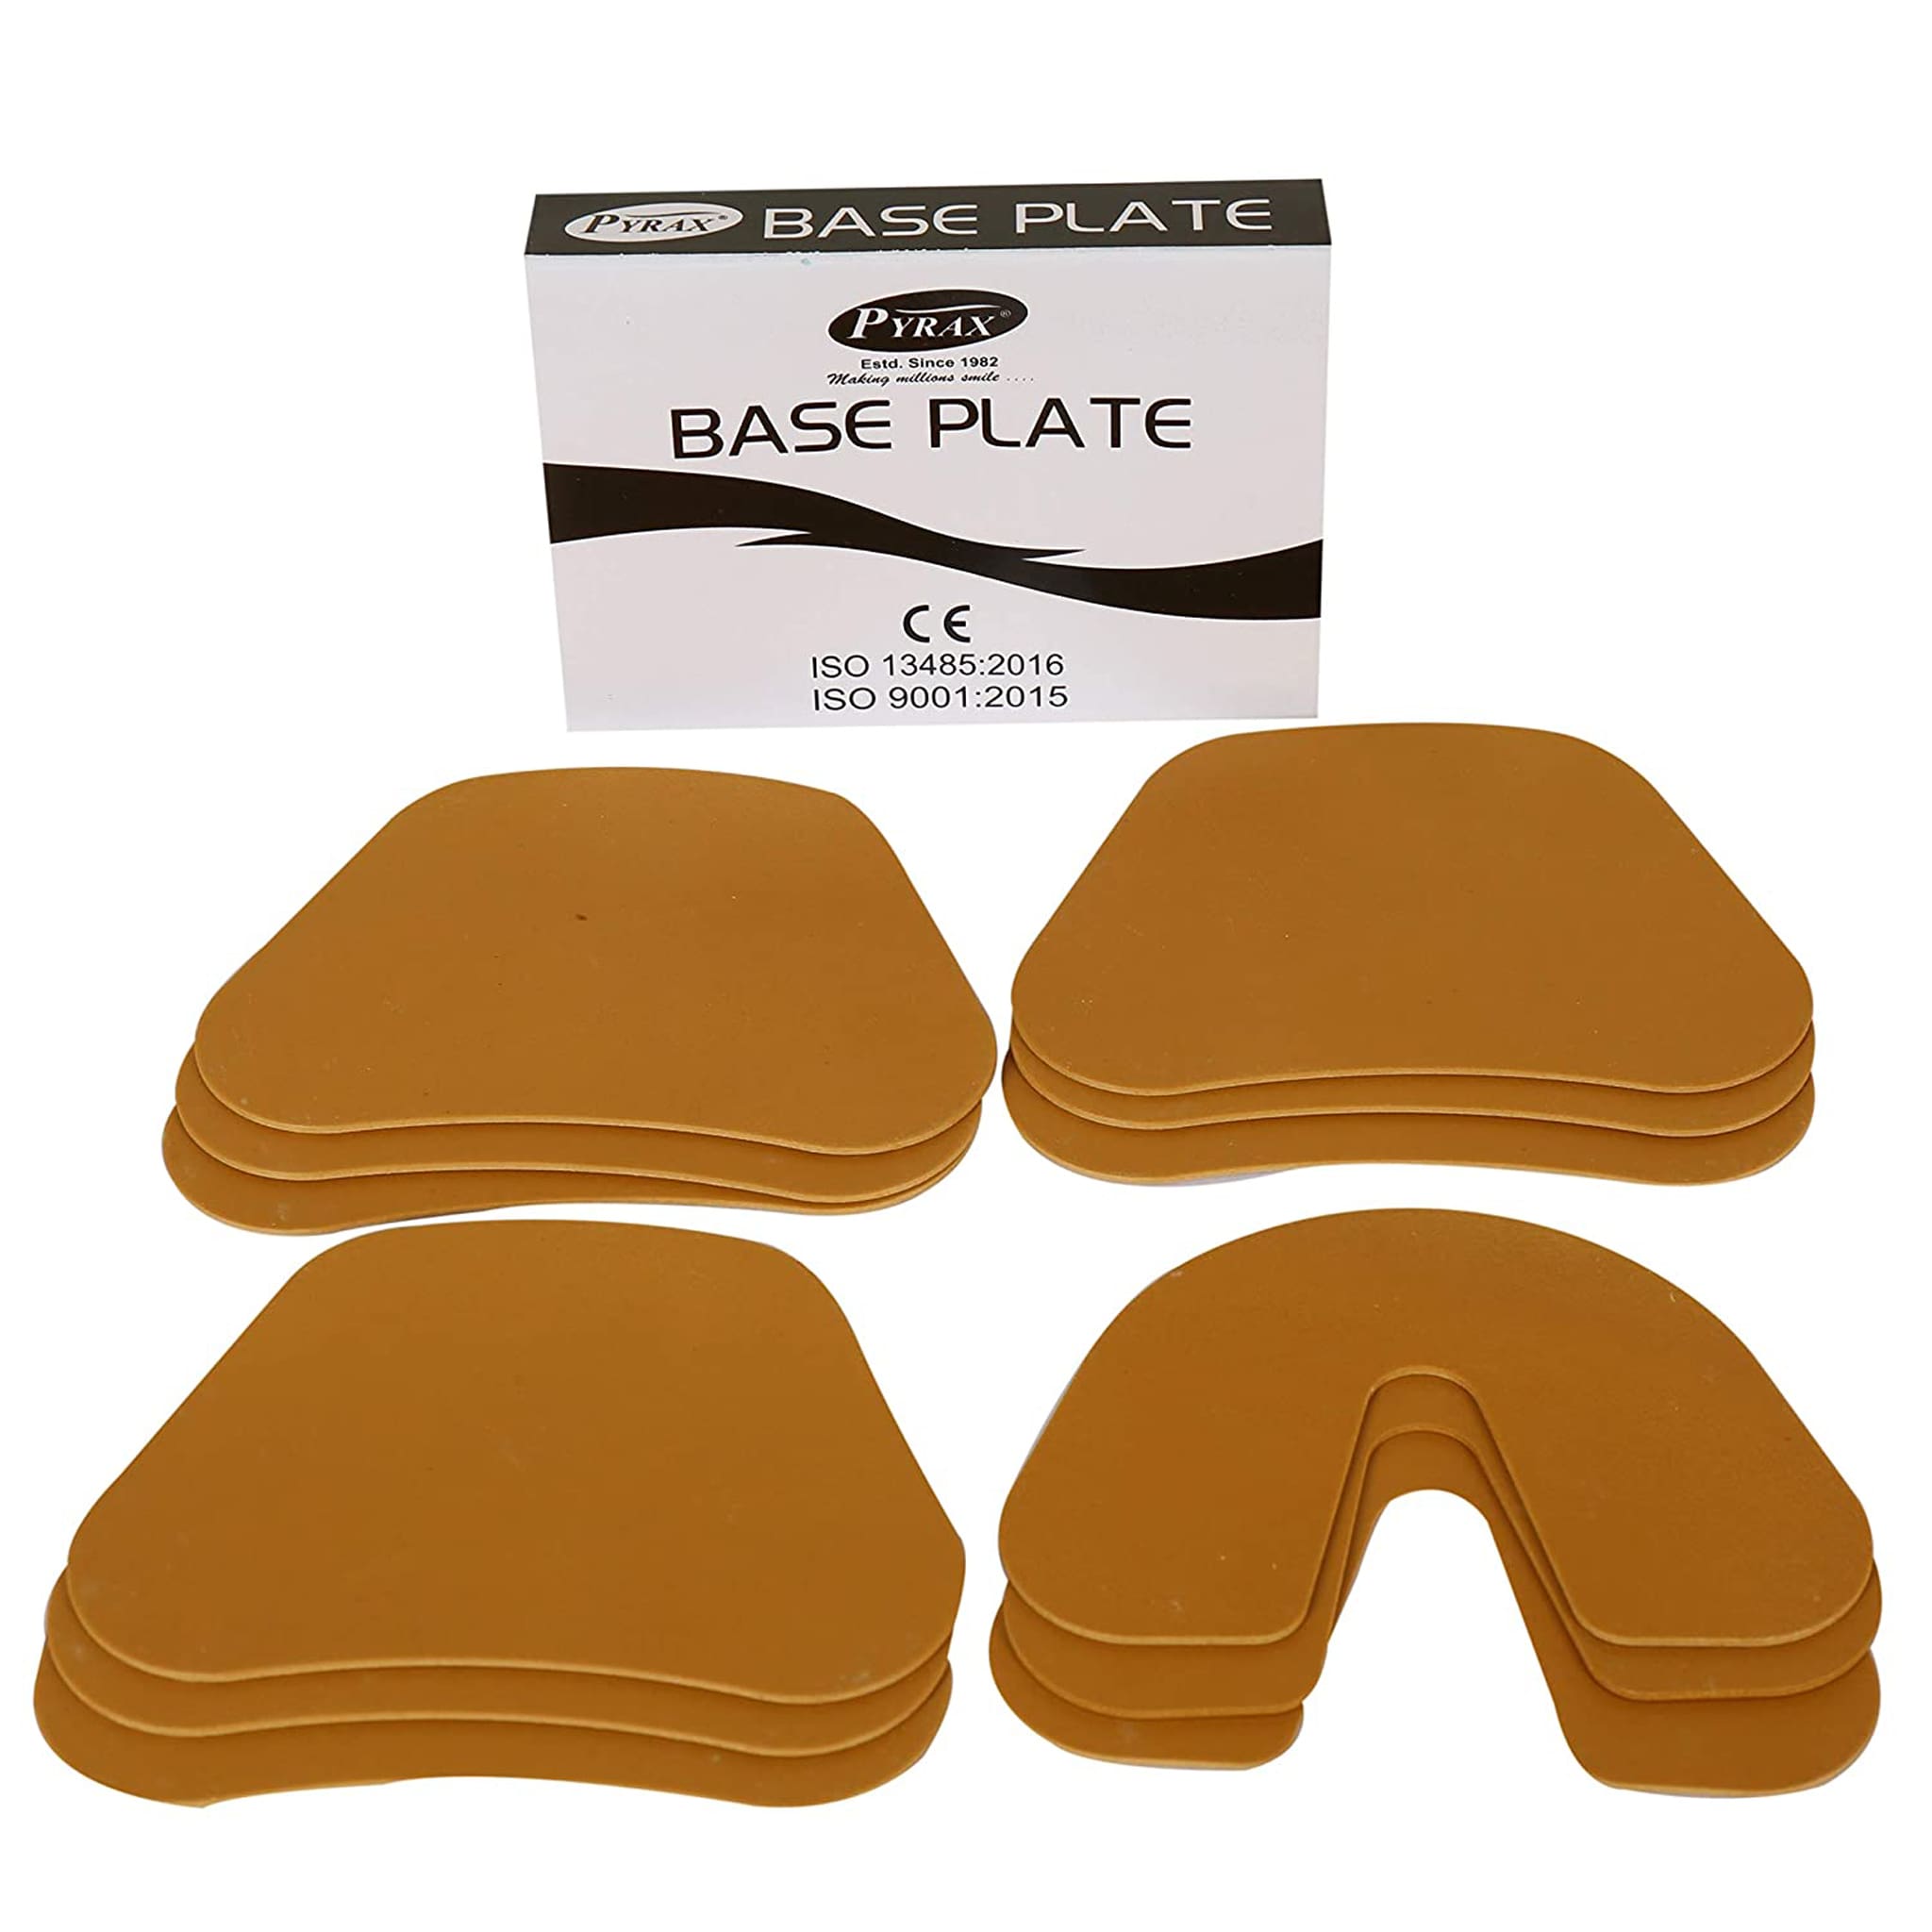 Pyrax Base Plate (9 Upper + 3 Lower)